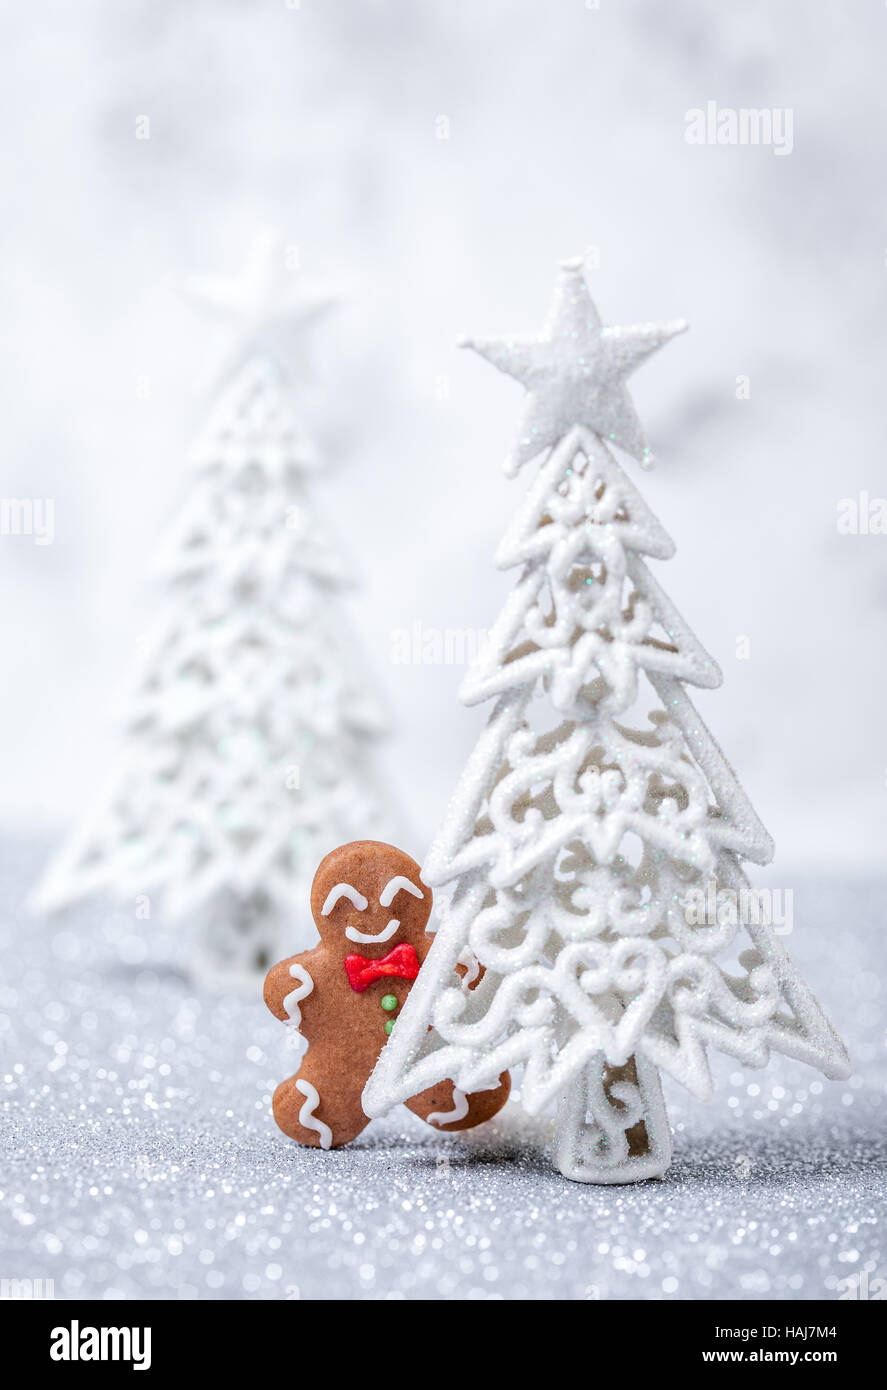 Funny gingerbread man card Stock Photo